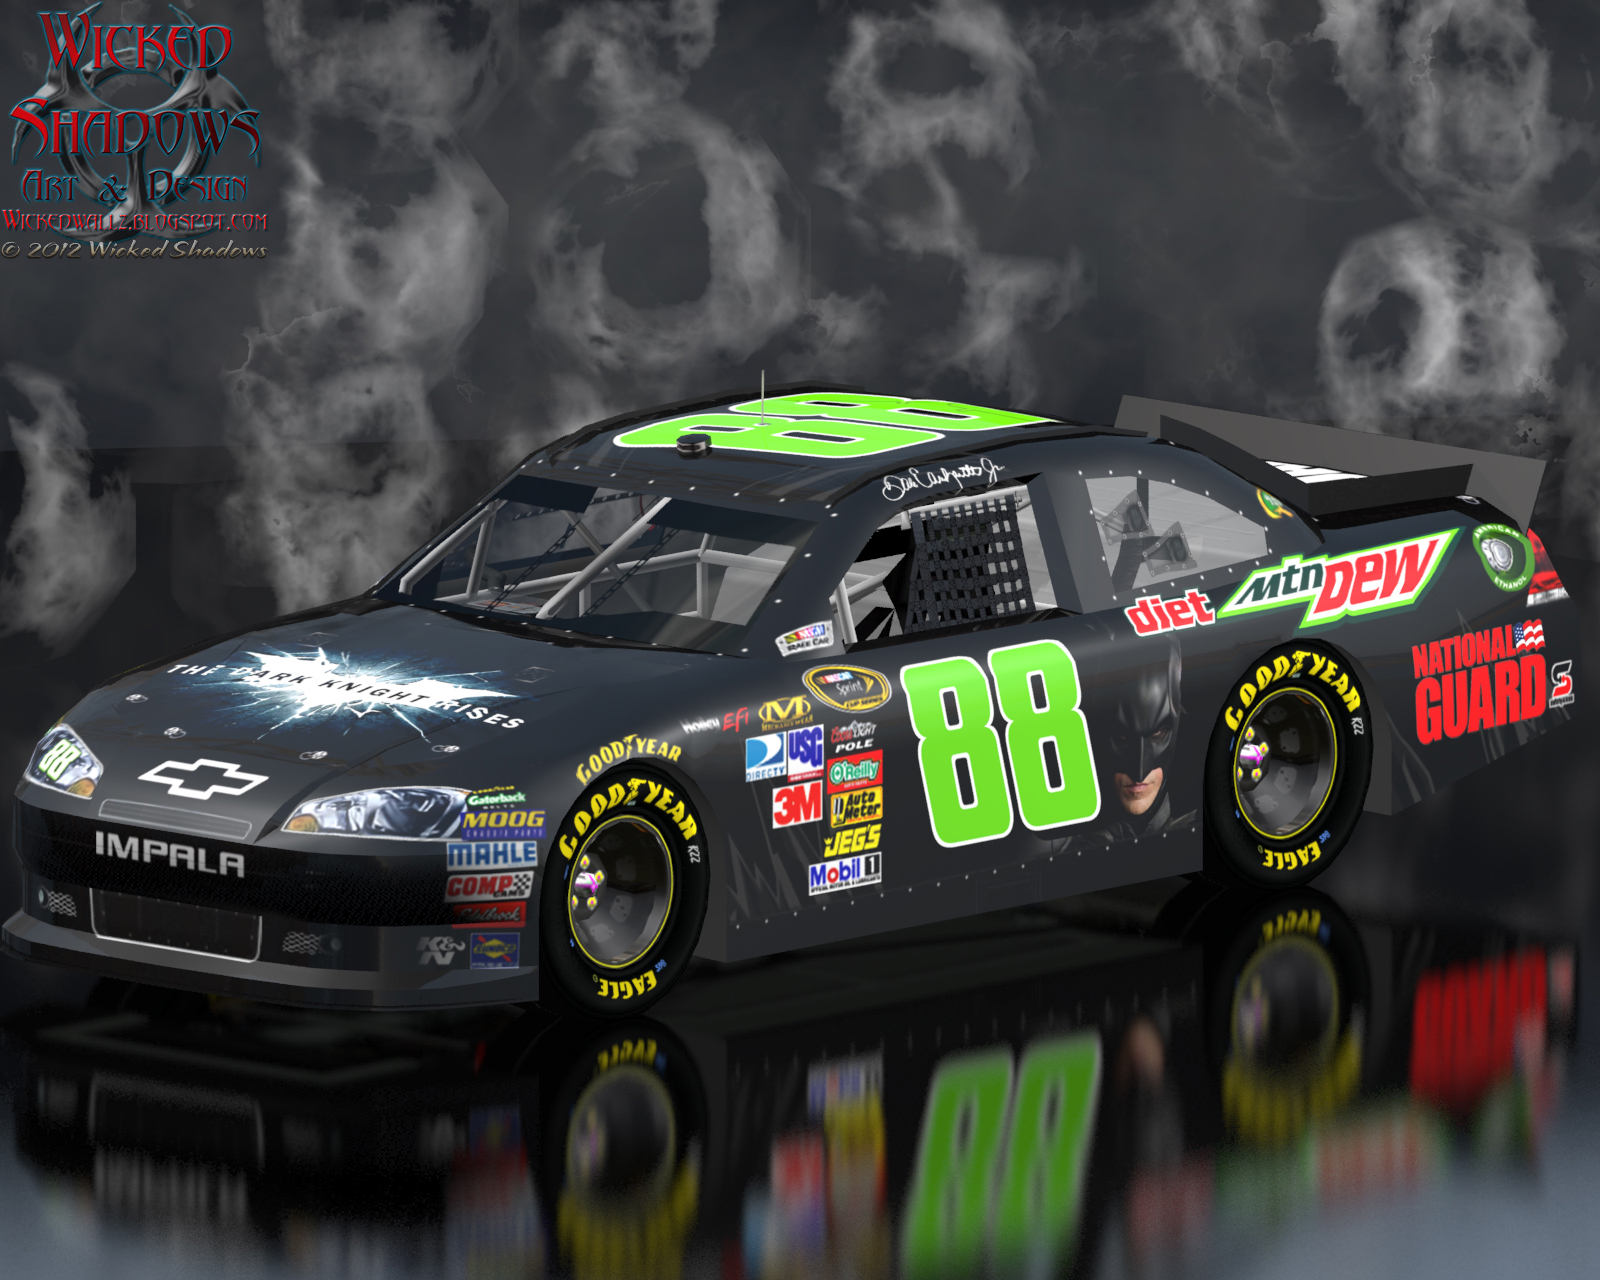 Wallpaper By Wicked Shadows Nascar